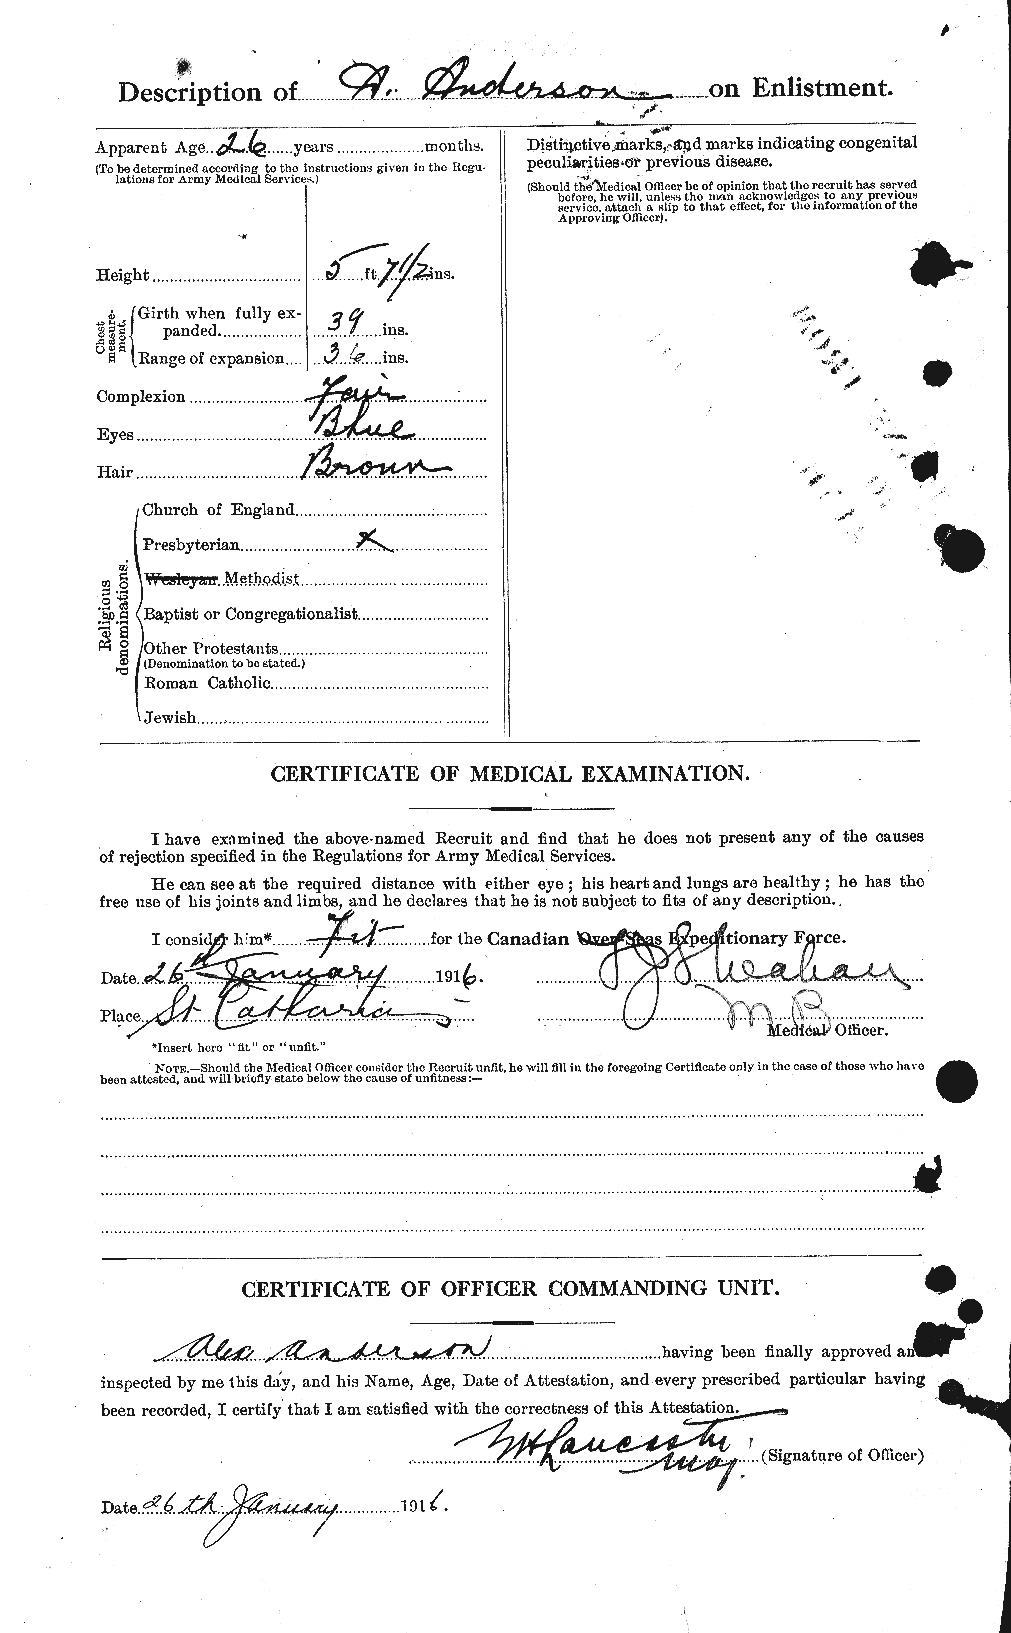 Personnel Records of the First World War - CEF 209522b